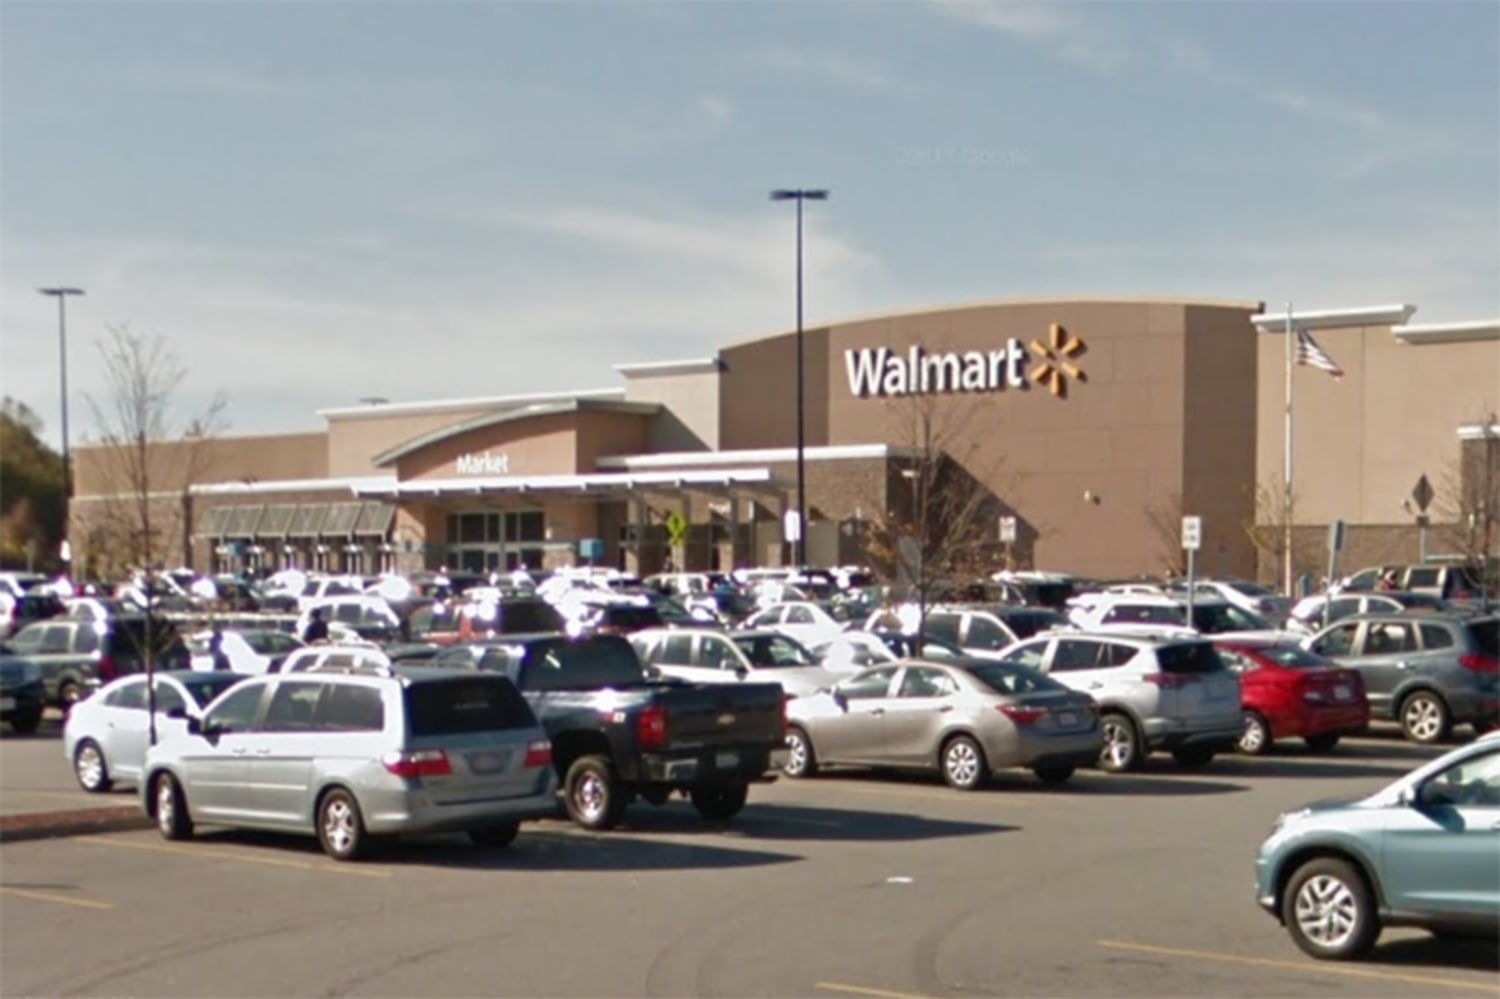 Massachusetts woman faces charge after gun goes off in Walmart